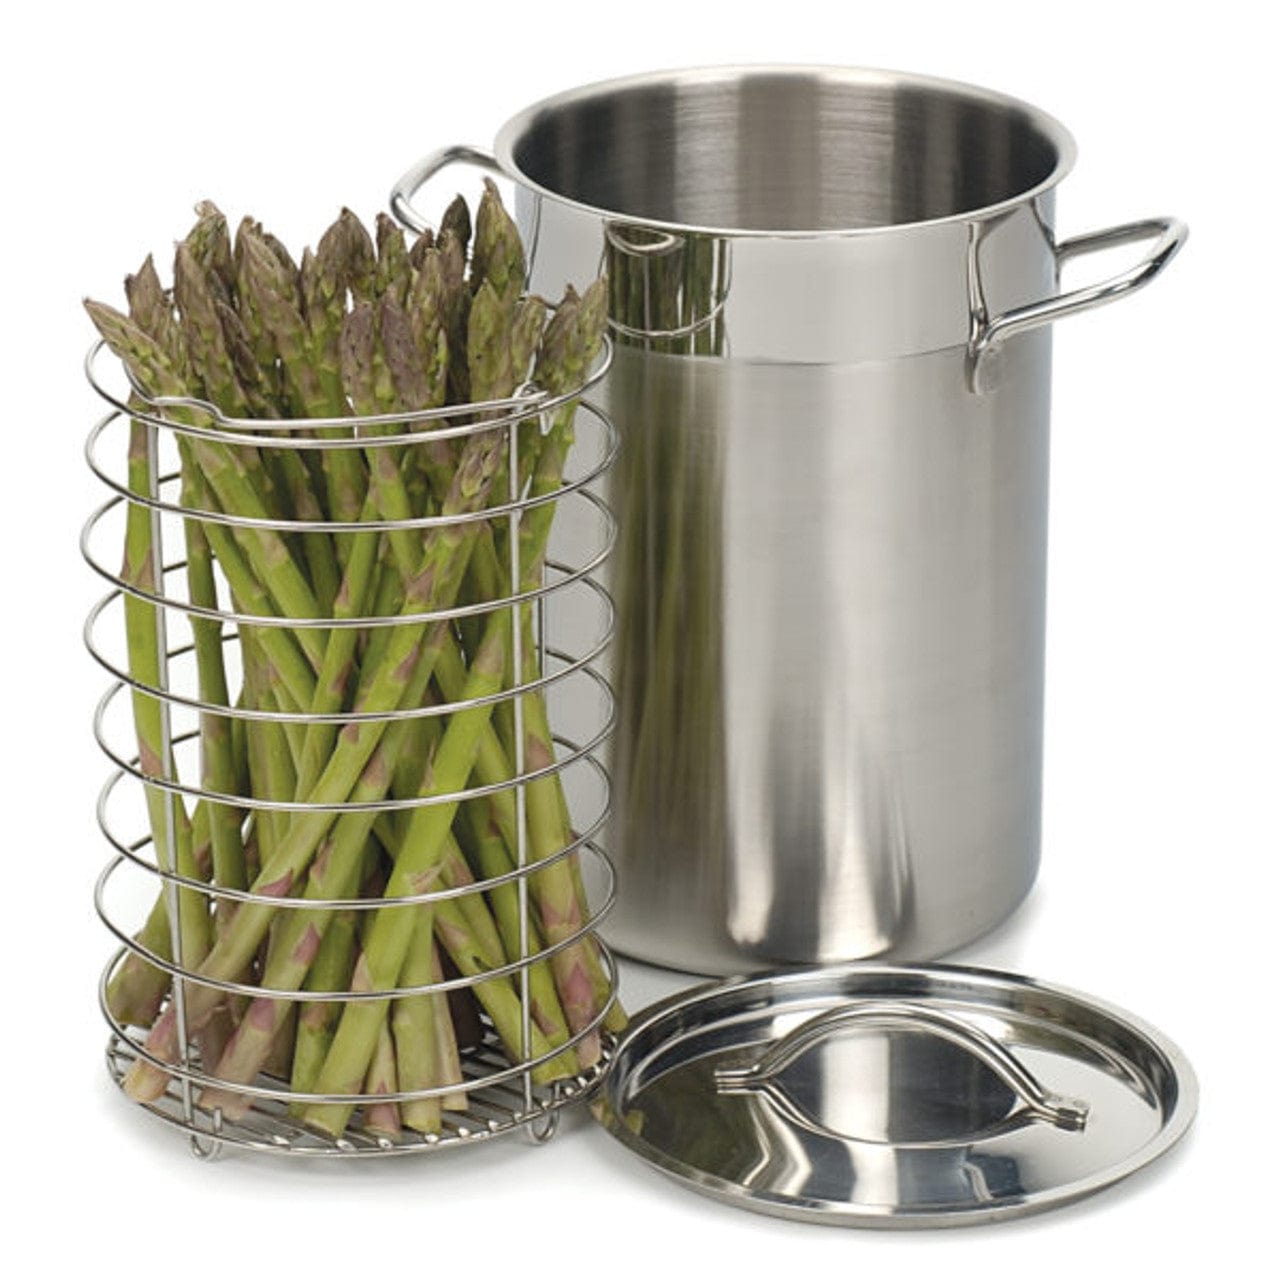 RSVP Stainless Steel Asparagus Steamer - Kitchen & Company